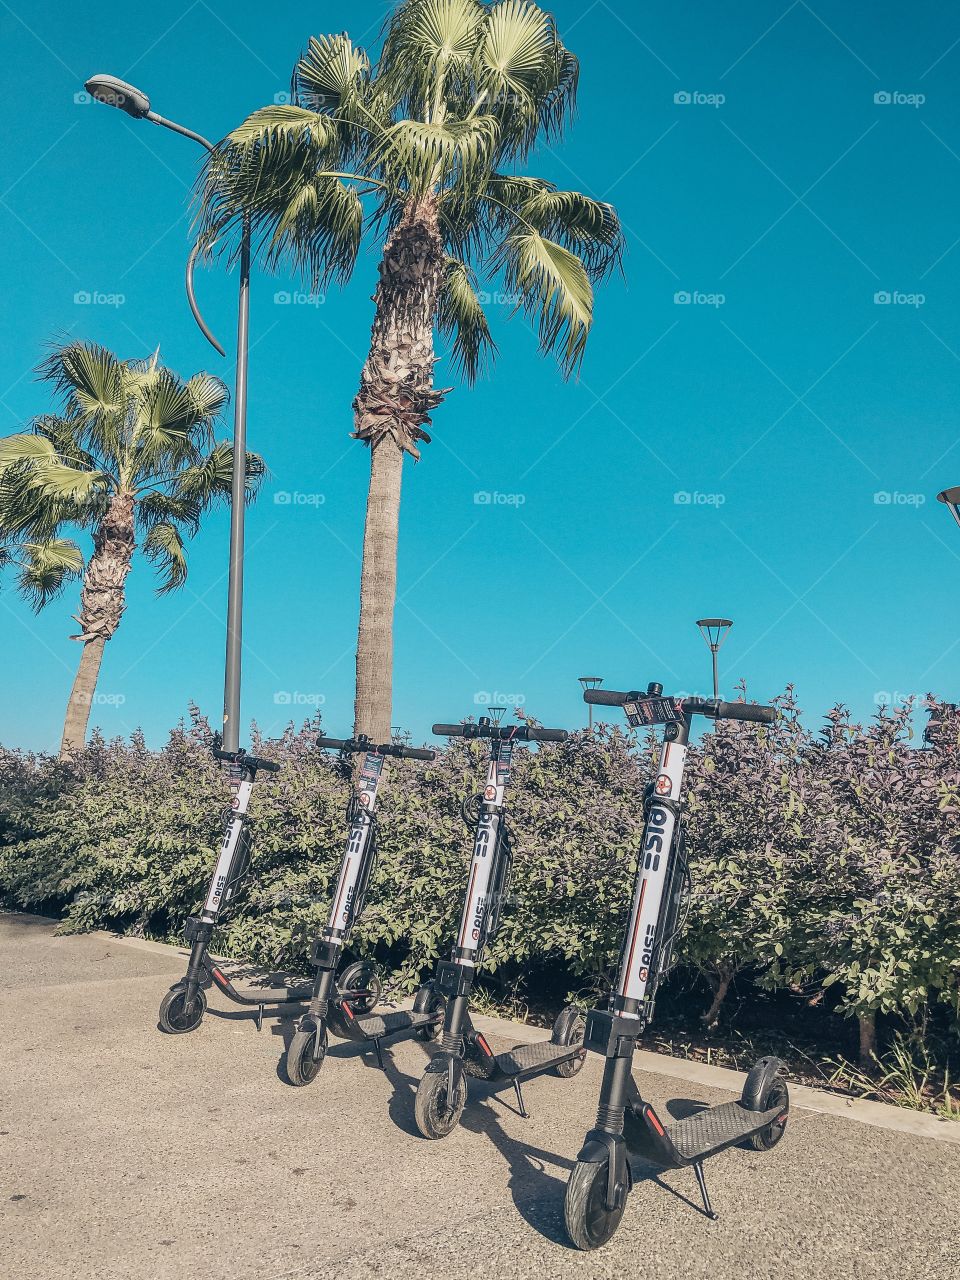 4 electric scooters for hire on the seaside promenade on a bright sunny day on a background of palm trees